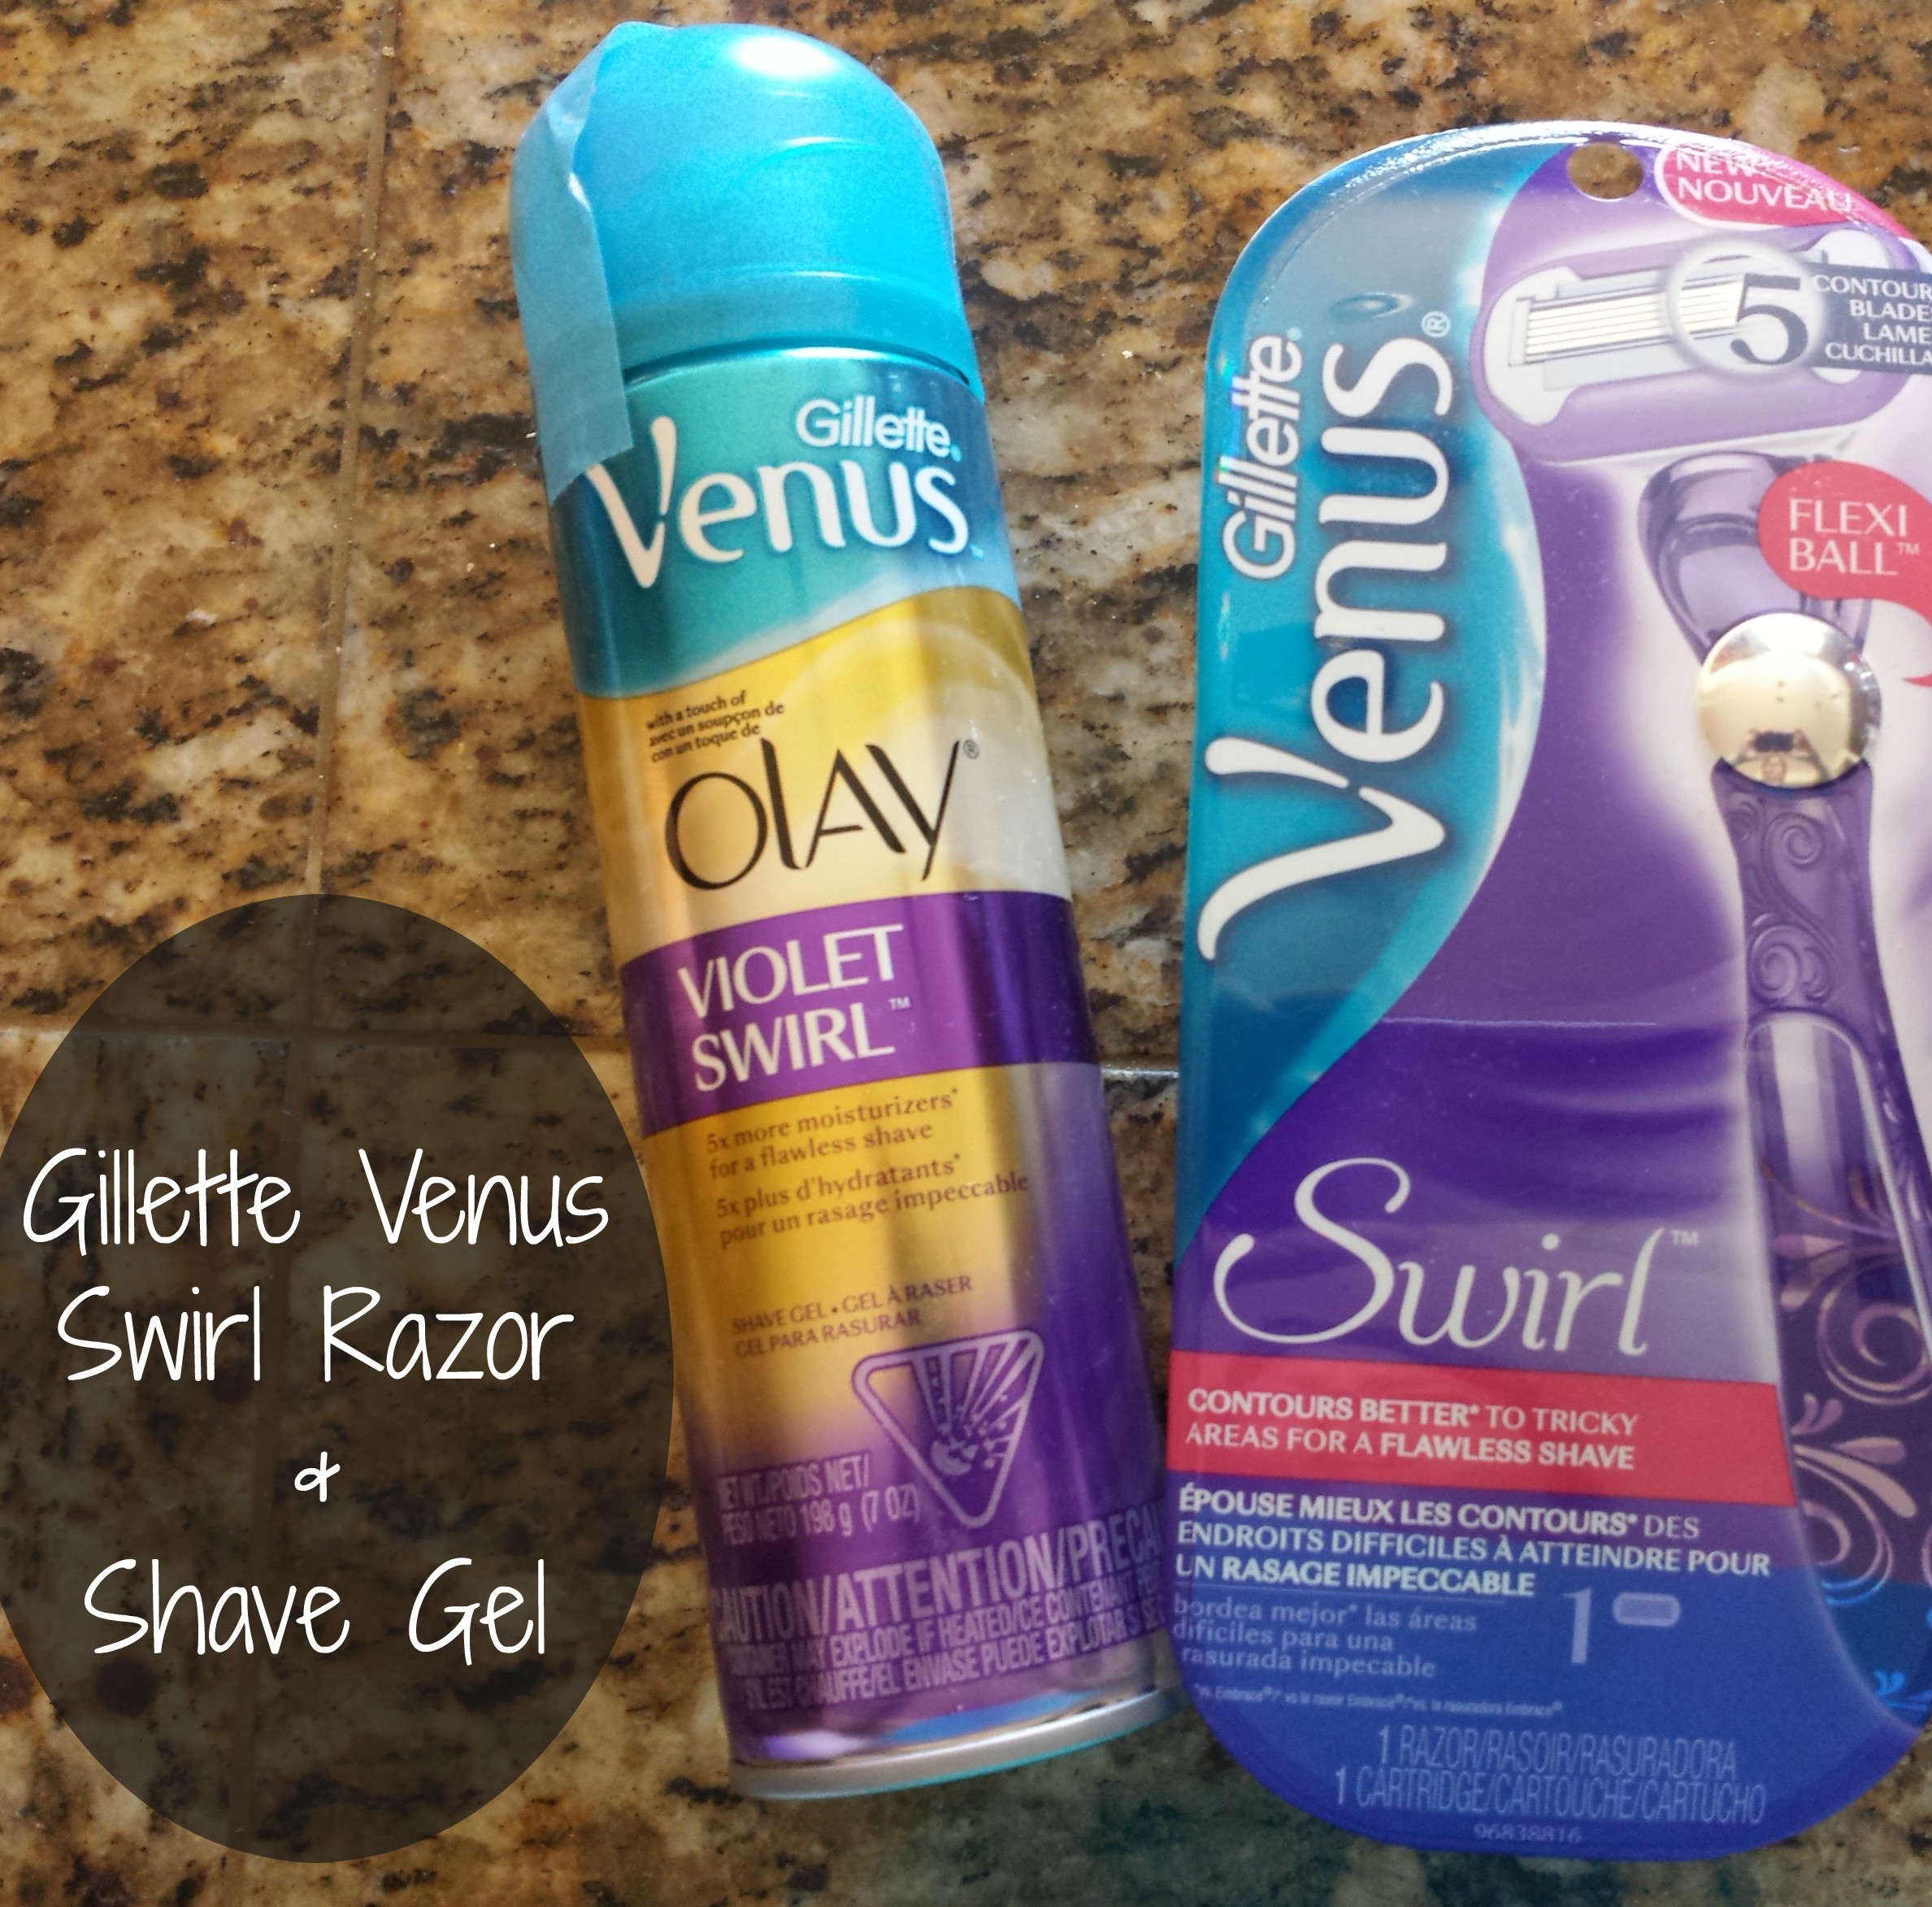 Gillette Venus Swirl AND a $20 Walmart Gift Card Giveaway!